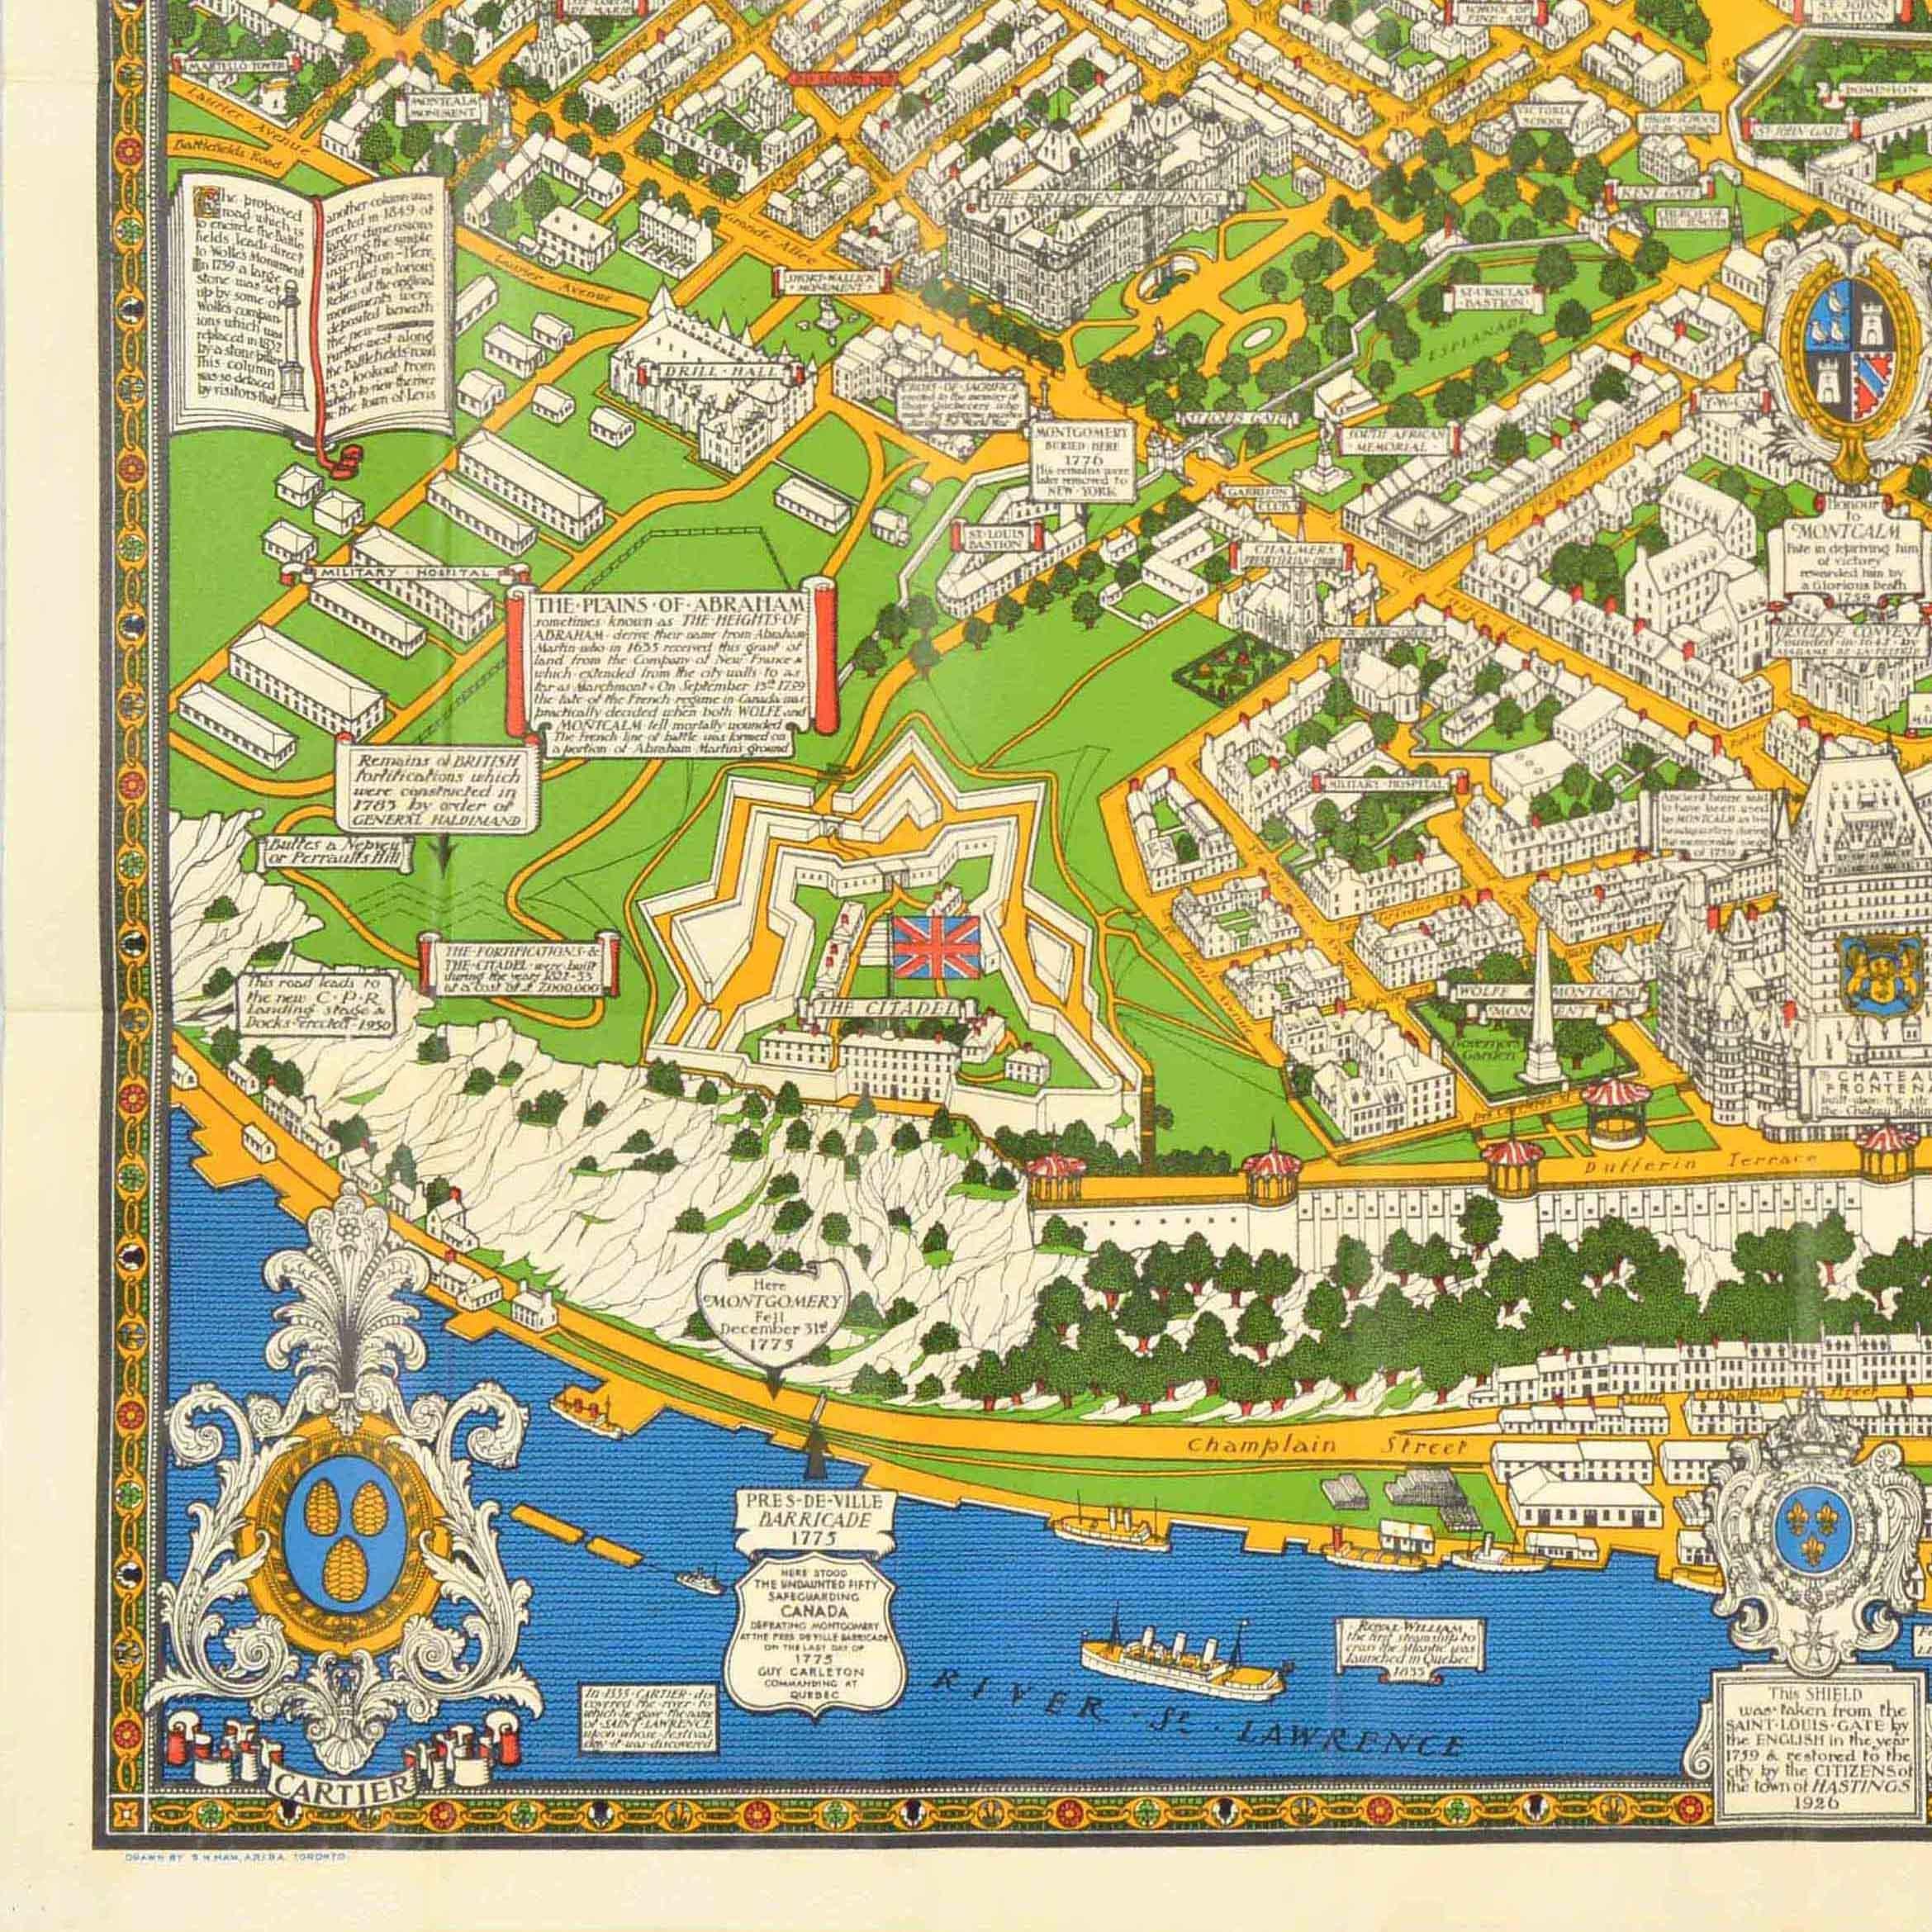 Original vintage travel map poster for The City of Quebec with historical notes drawn by S.H. Maw Toronto (Samuel Herbert Maw; 1881-1952) featuring a colourful pictorial map illustrated with coats of arms and historical buildings showing the streets